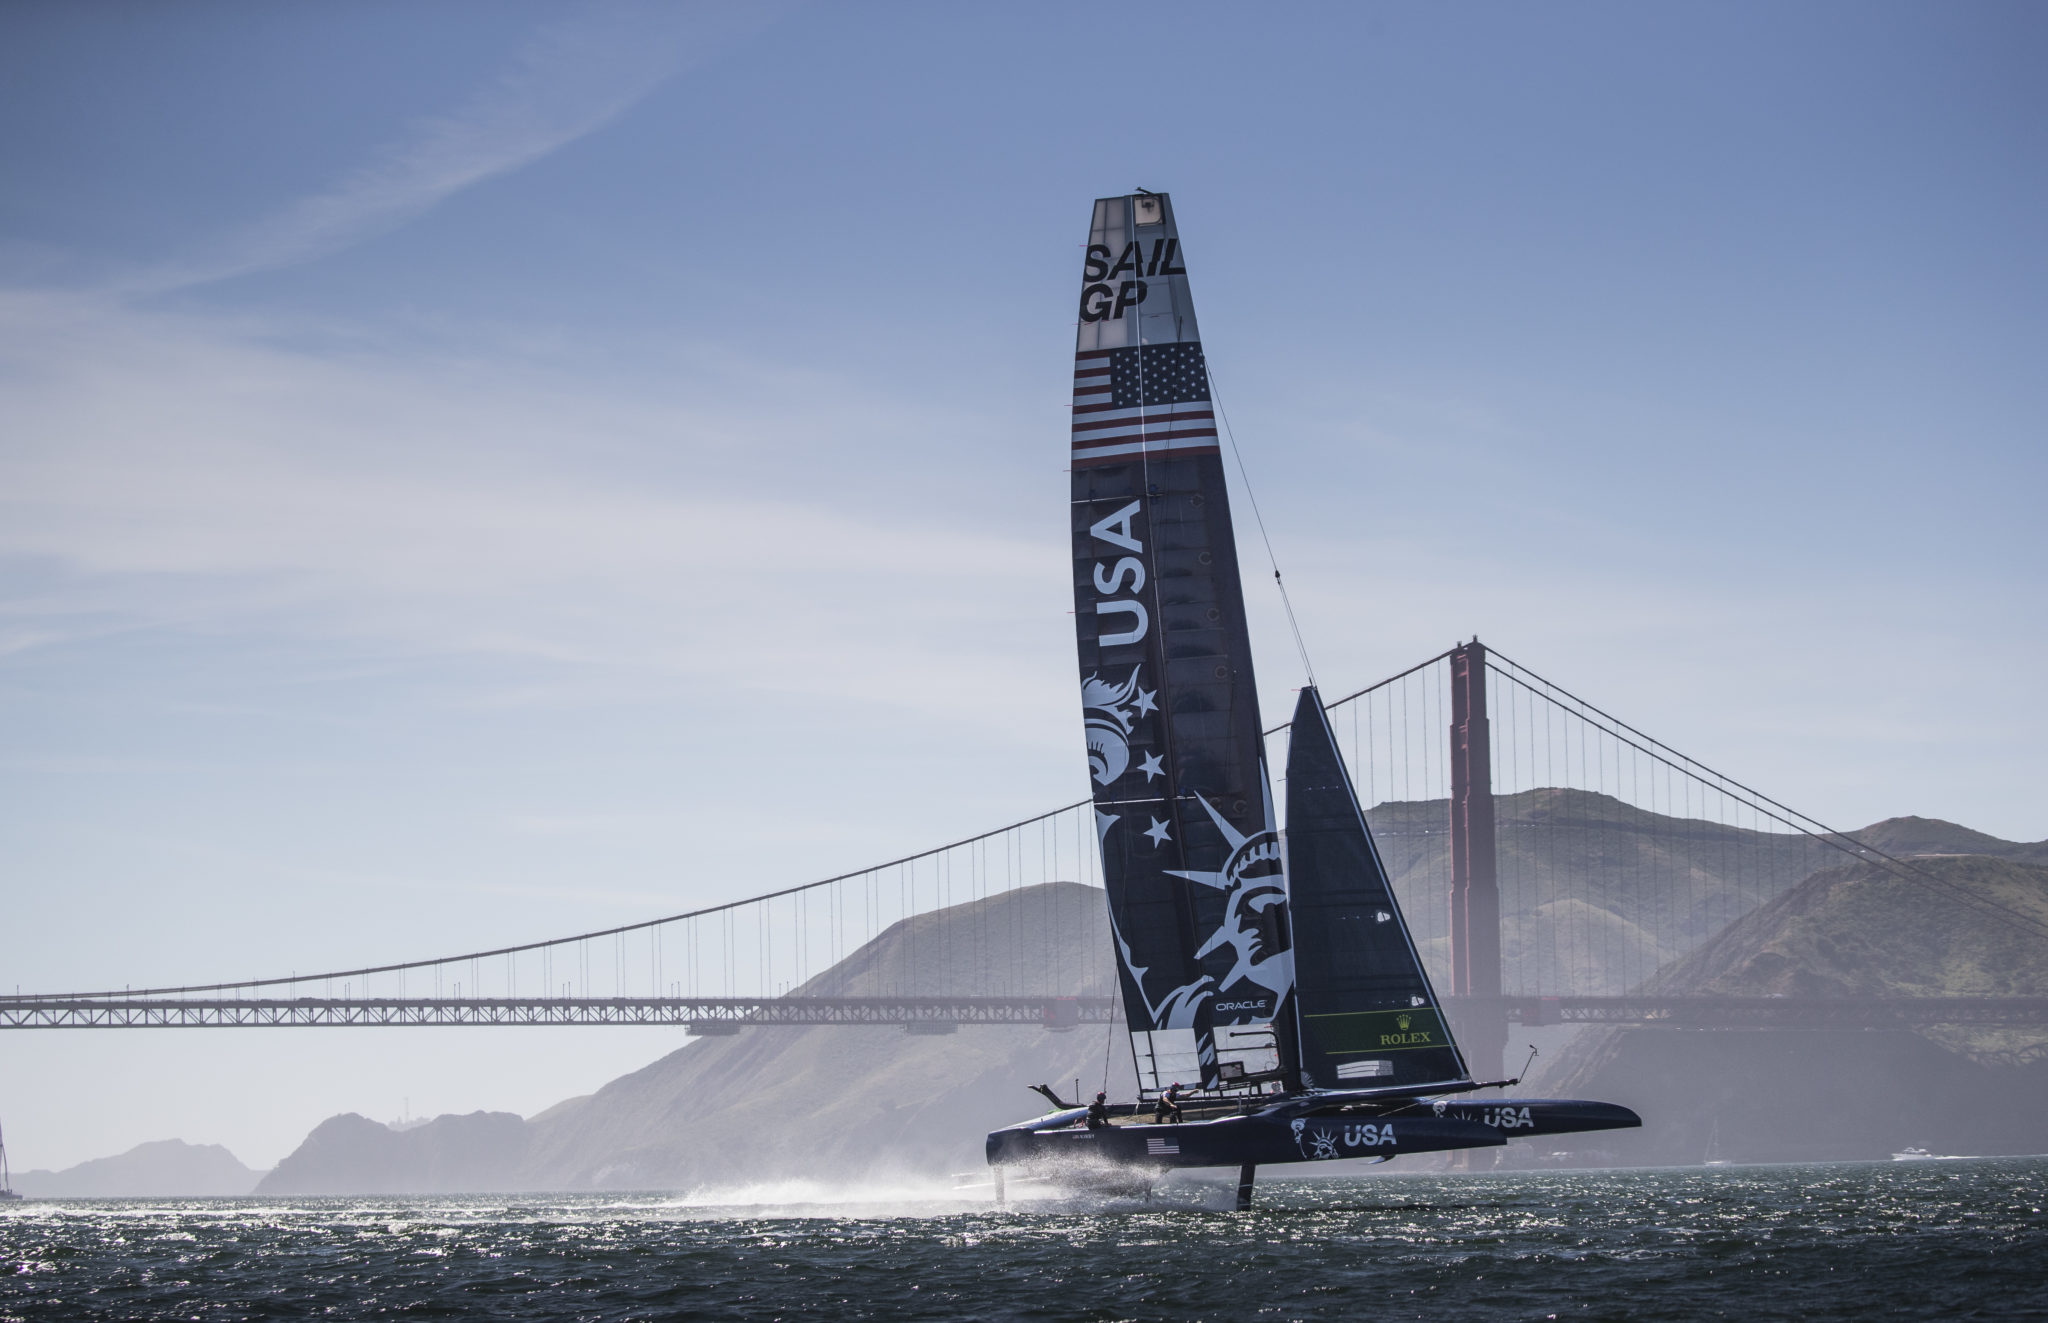 he United States SailGP team in action on their second day of practice Race 2 Season 1 SailGP event in San Francisco, California, United States. 23 April 2019. Photo: Lloyd Images for SailGP. (Handout image supplied by SailGP)